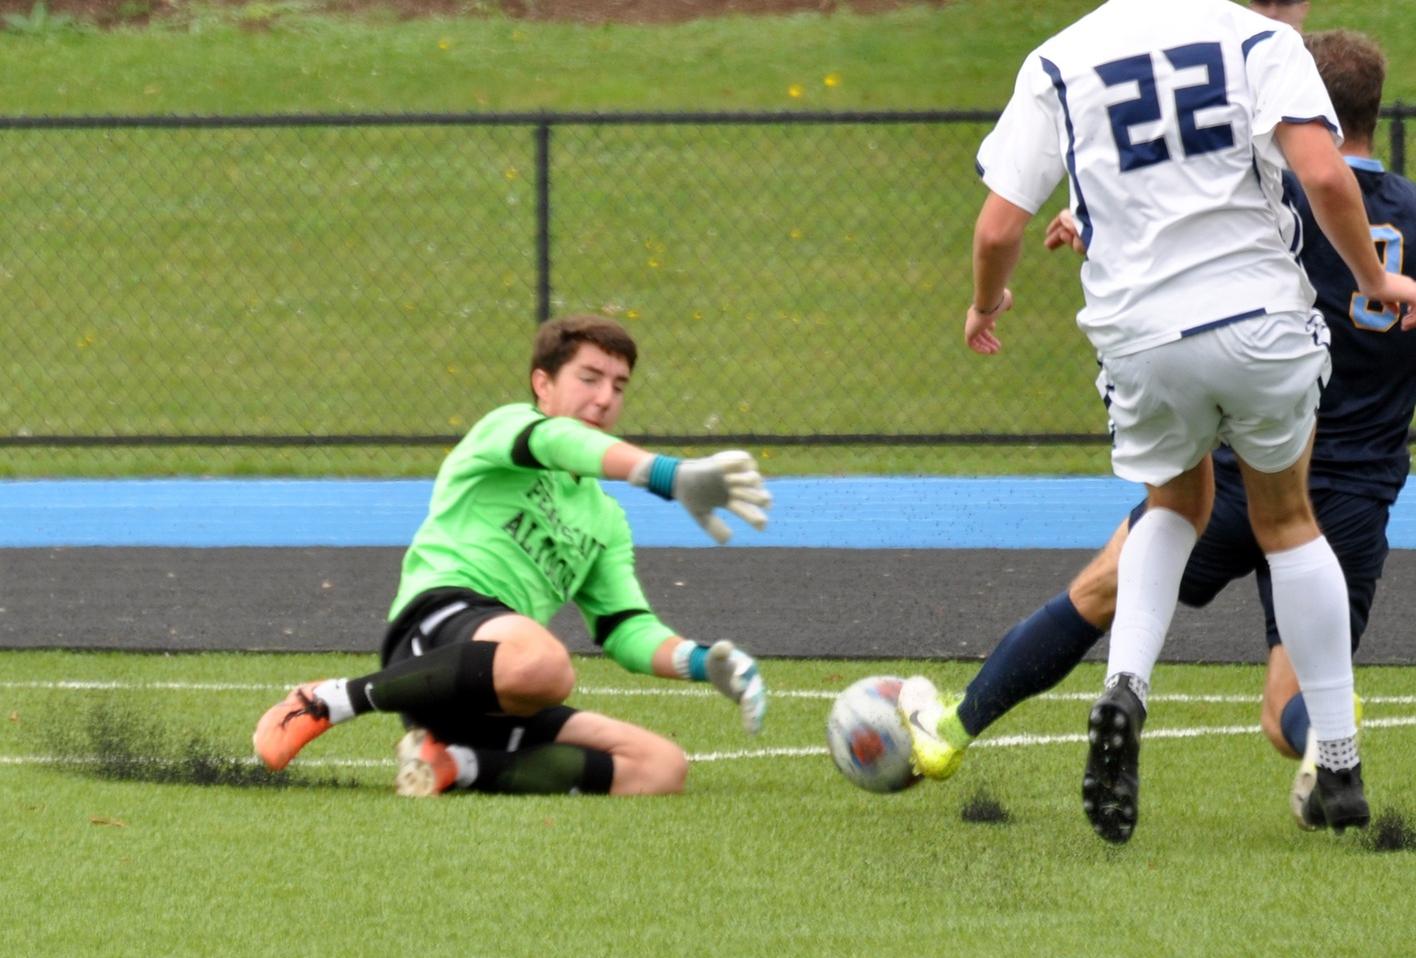 Photo (by Joel Nelson): Penn State Altoona sophomore goalkeeper Tanner Yaw slides to grab the ball during the Lions' loss to Medaille College on Saturday afternoon at Spring Run Stadium.